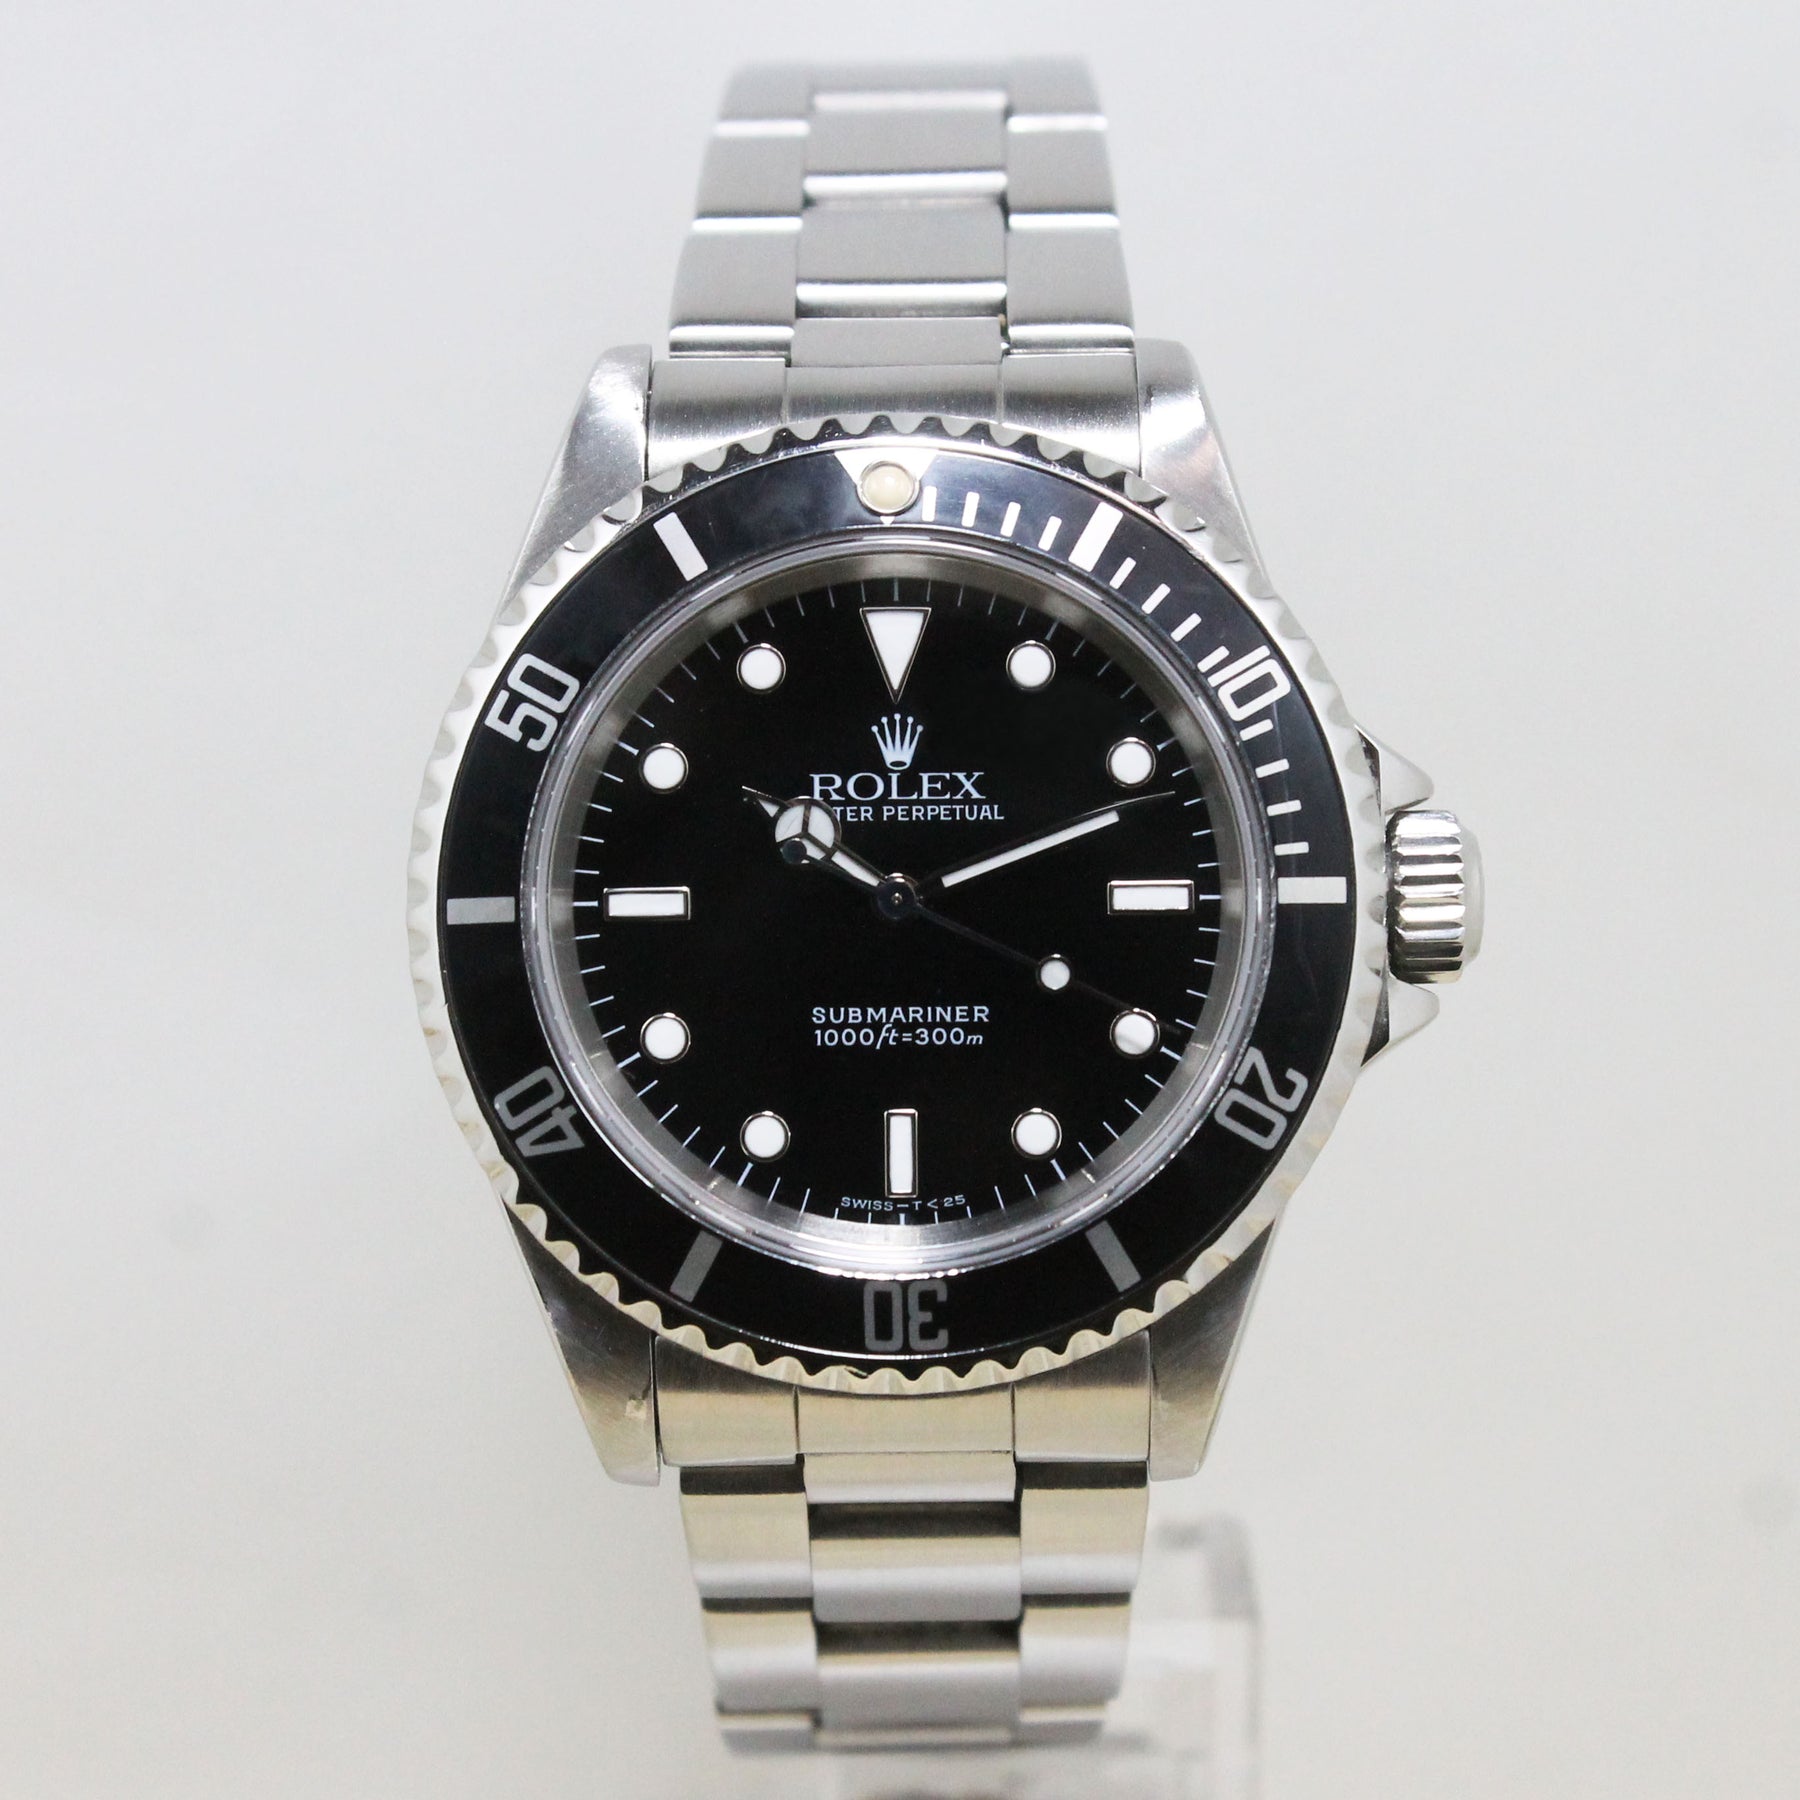 1991 Rolex Submariner Ref. 14060  (with Box & Papers)